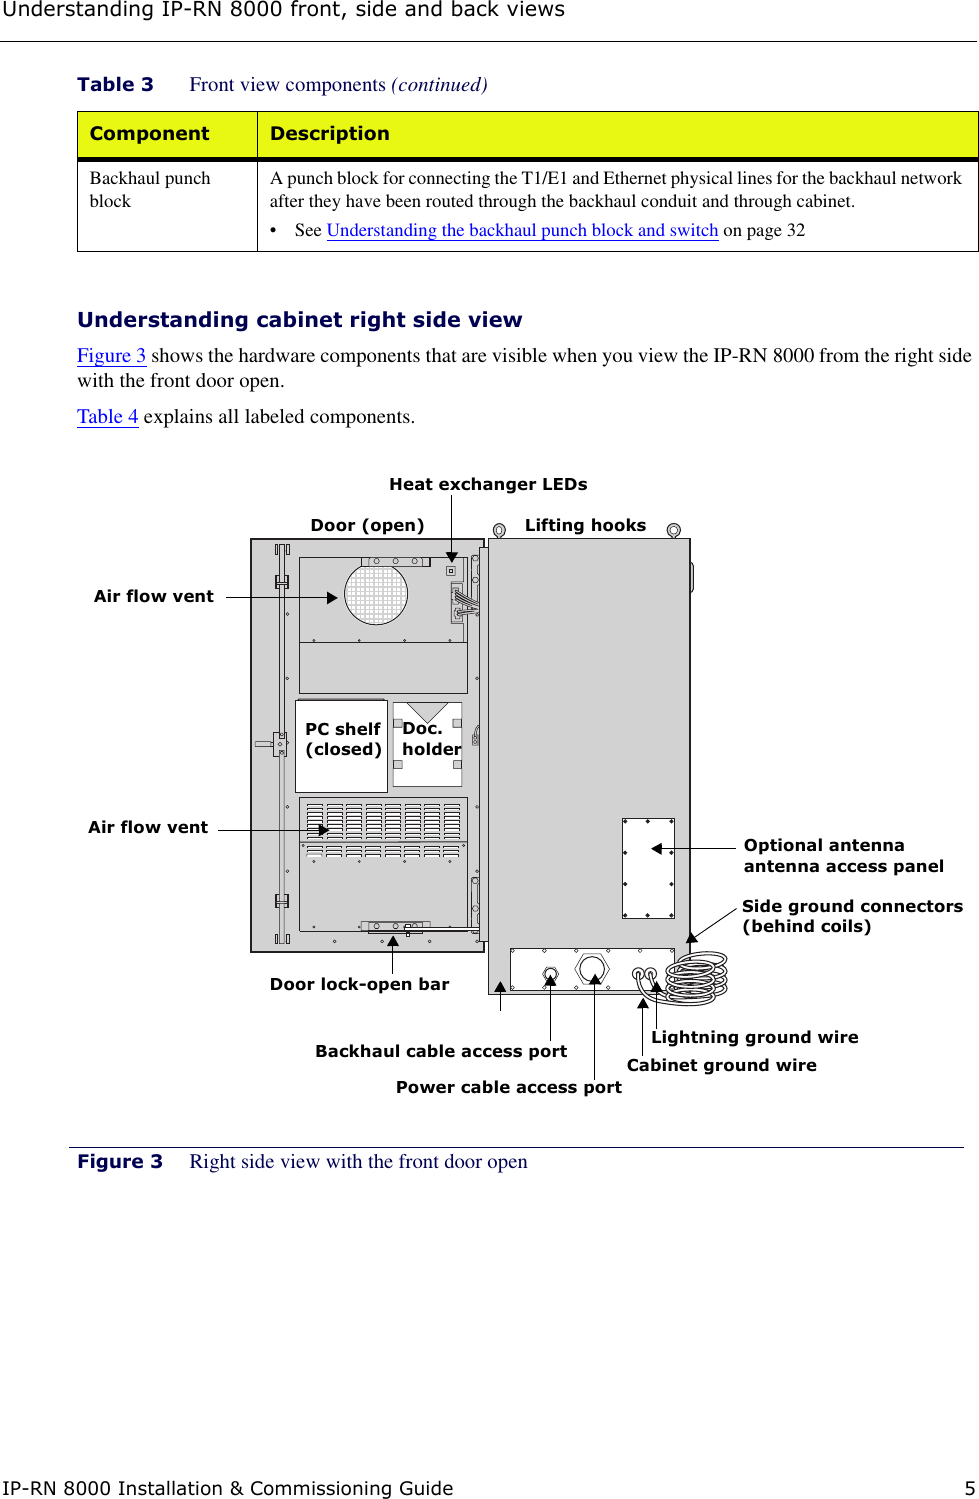 Understanding IP-RN 8000 front, side and back viewsIP-RN 8000 Installation &amp; Commissioning Guide 5Understanding cabinet right side viewFigure 3 shows the hardware components that are visible when you view the IP-RN 8000 from the right side with the front door open. Table 4 explains all labeled components. Figure 3 Right side view with the front door openBackhaul punch blockA punch block for connecting the T1/E1 and Ethernet physical lines for the backhaul network after they have been routed through the backhaul conduit and through cabinet. • See Understanding the backhaul punch block and switch on page 32Table 3 Front view components (continued)Component DescriptionDoc.Air flow ventholderPC shelfDoor lock-open barPower cable access portBackhaul cable access port Lightning ground wireOptional antennaantenna access panelDoor (open) Lifting hooksSide ground connectors(closed)Air flow ventCabinet ground wire (behind coils)Heat exchanger LEDs